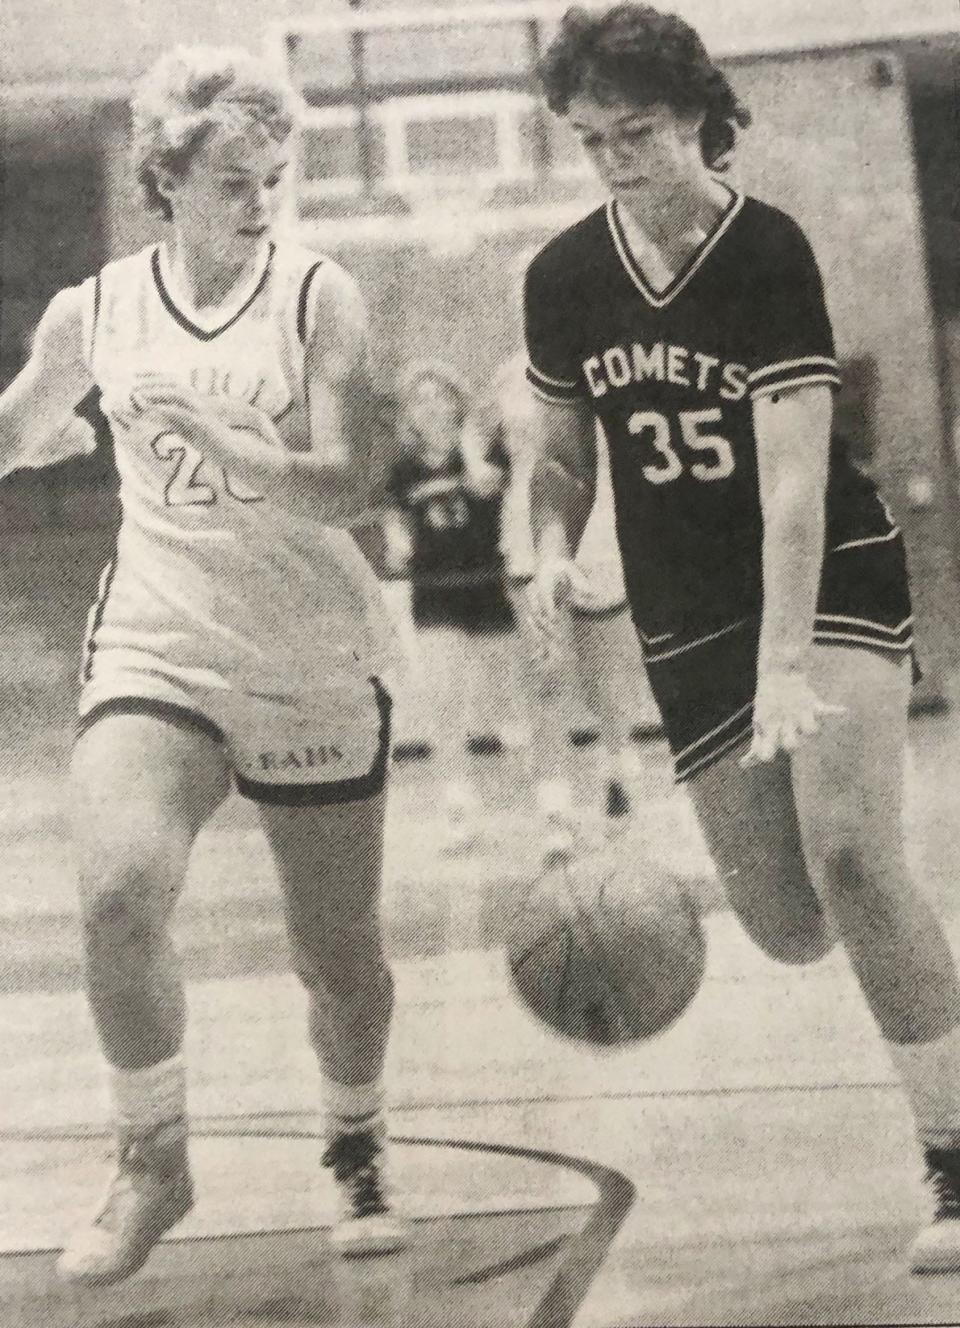 South Shore's Amy Nawroth (35) drives against Rosholt's Tami Madsen during the 1986 Region 1B girls basketball championship in Webster. Nawroth played with a sprained ankle late in the game but still scored 18 points to lead the Comets to a 51-47 overtime win.